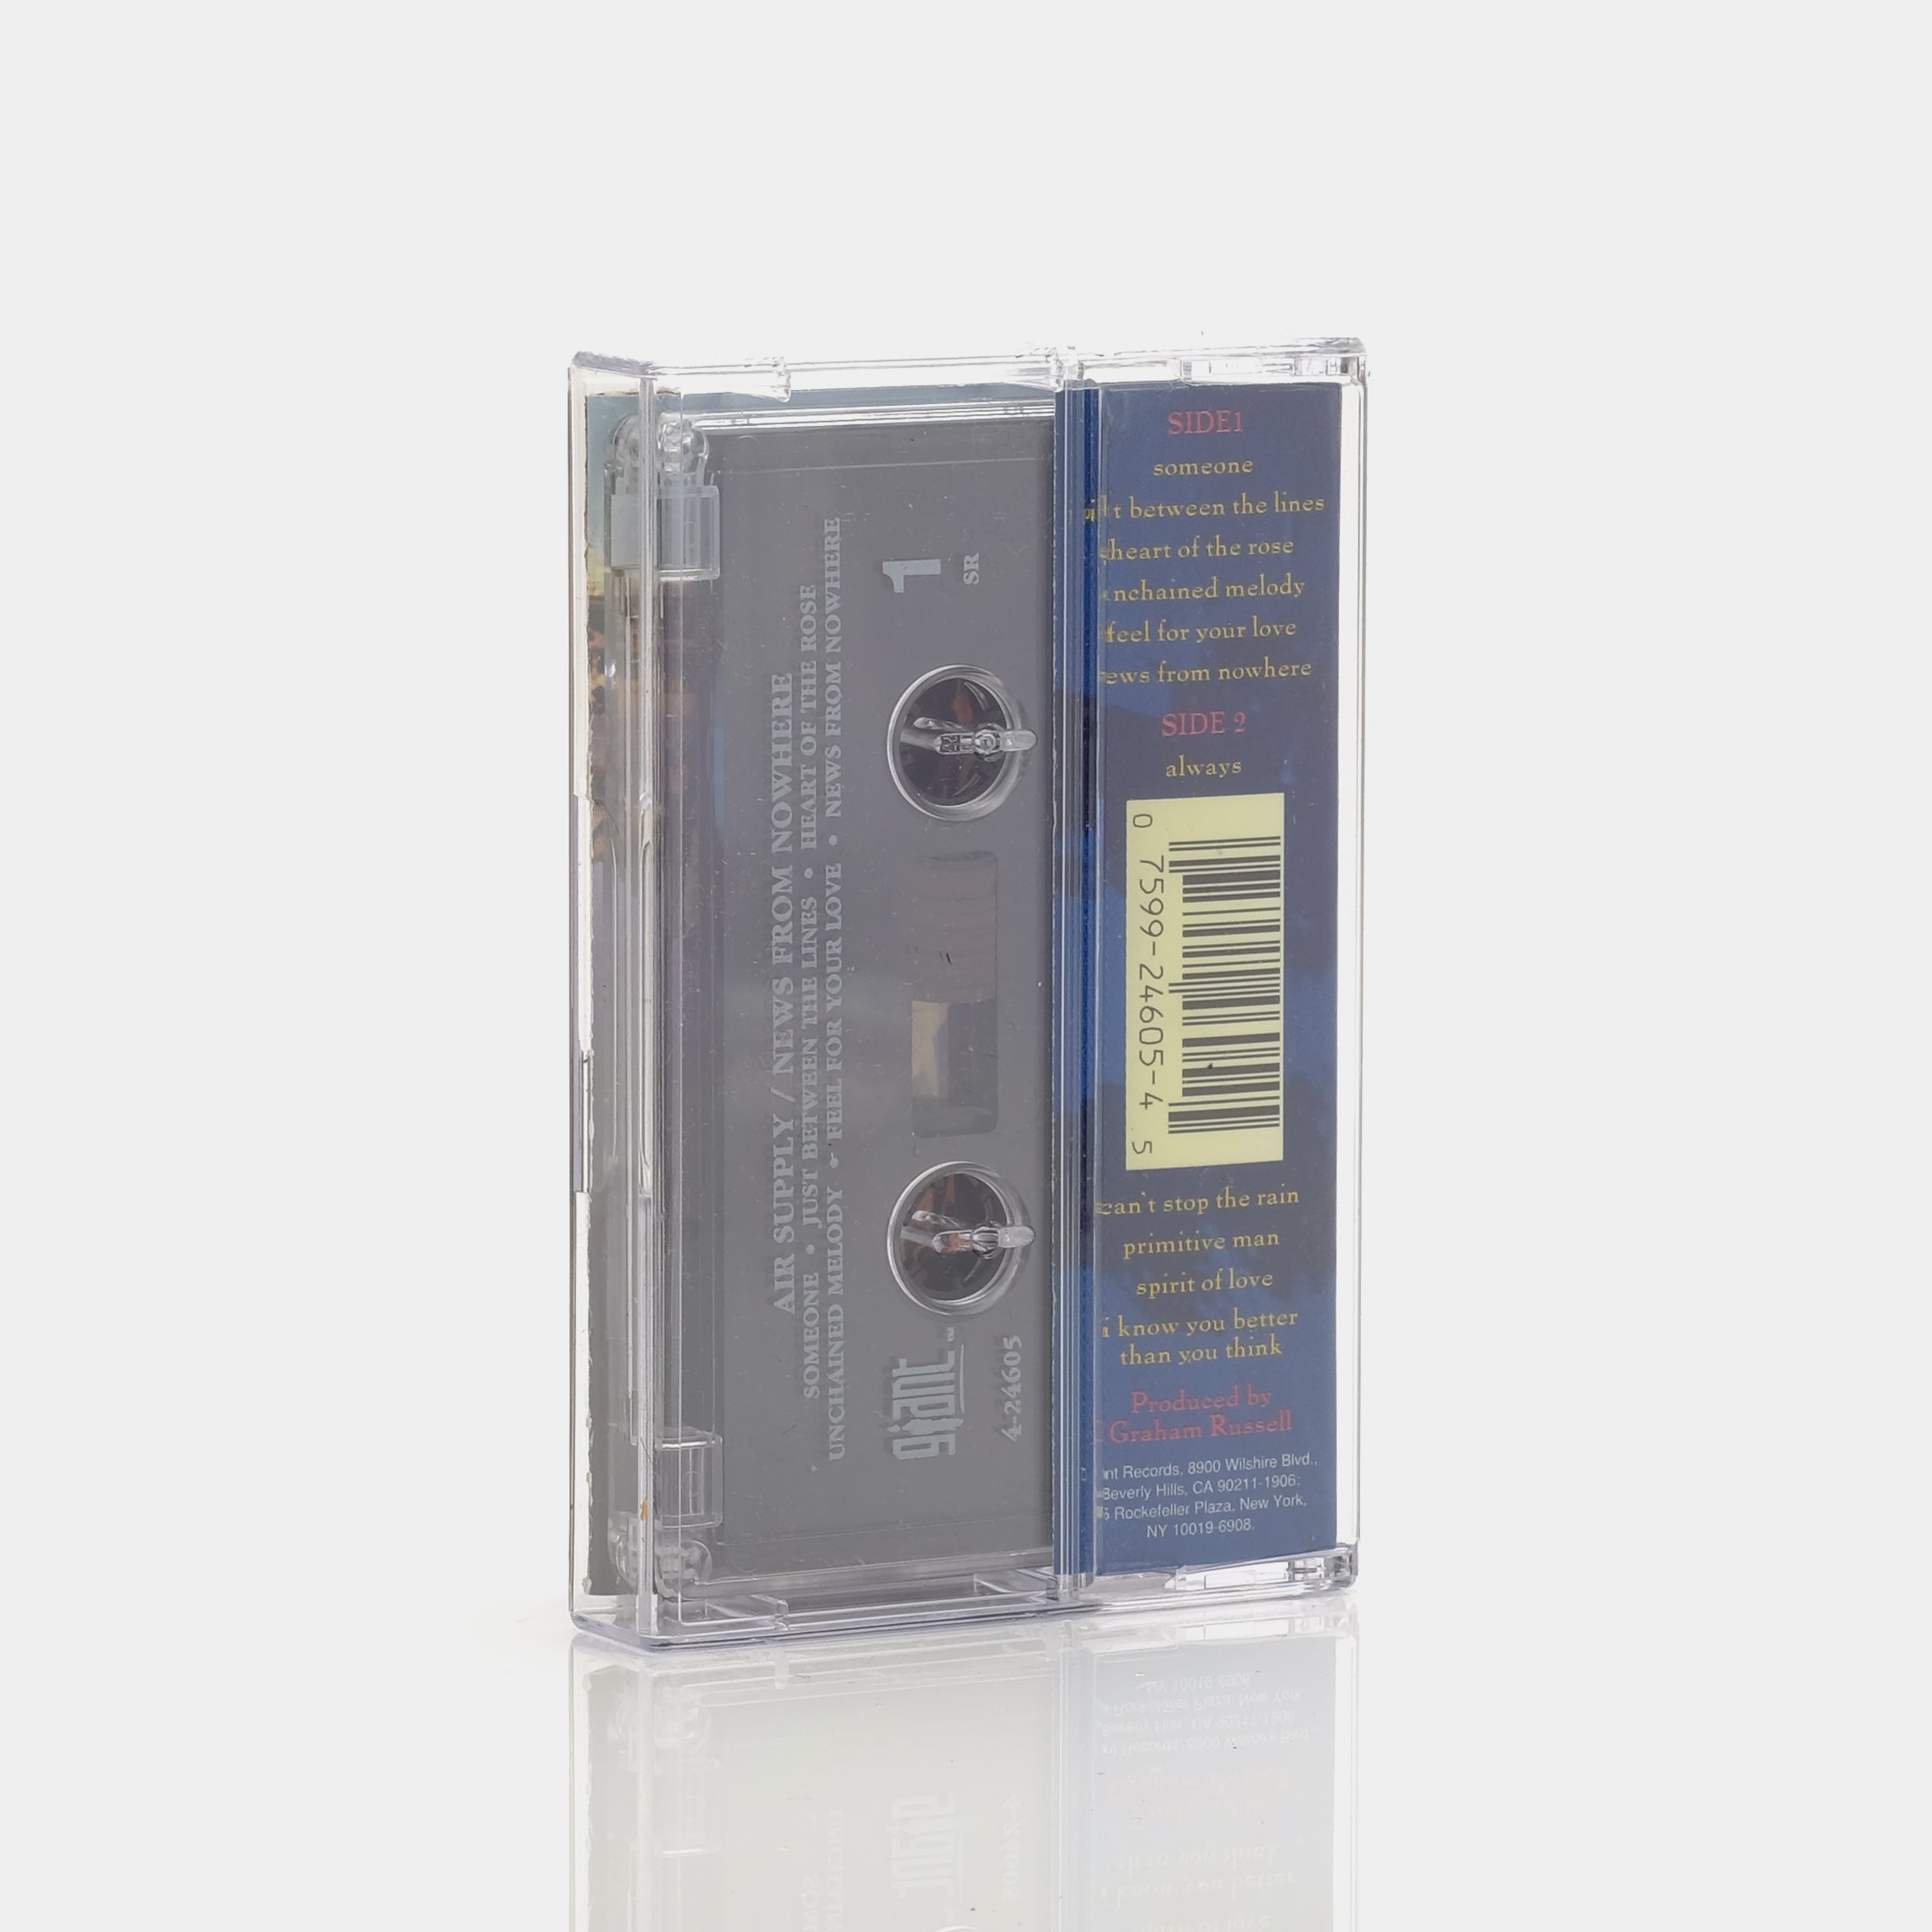 Air Supply - News From Nowhere Cassette Tape